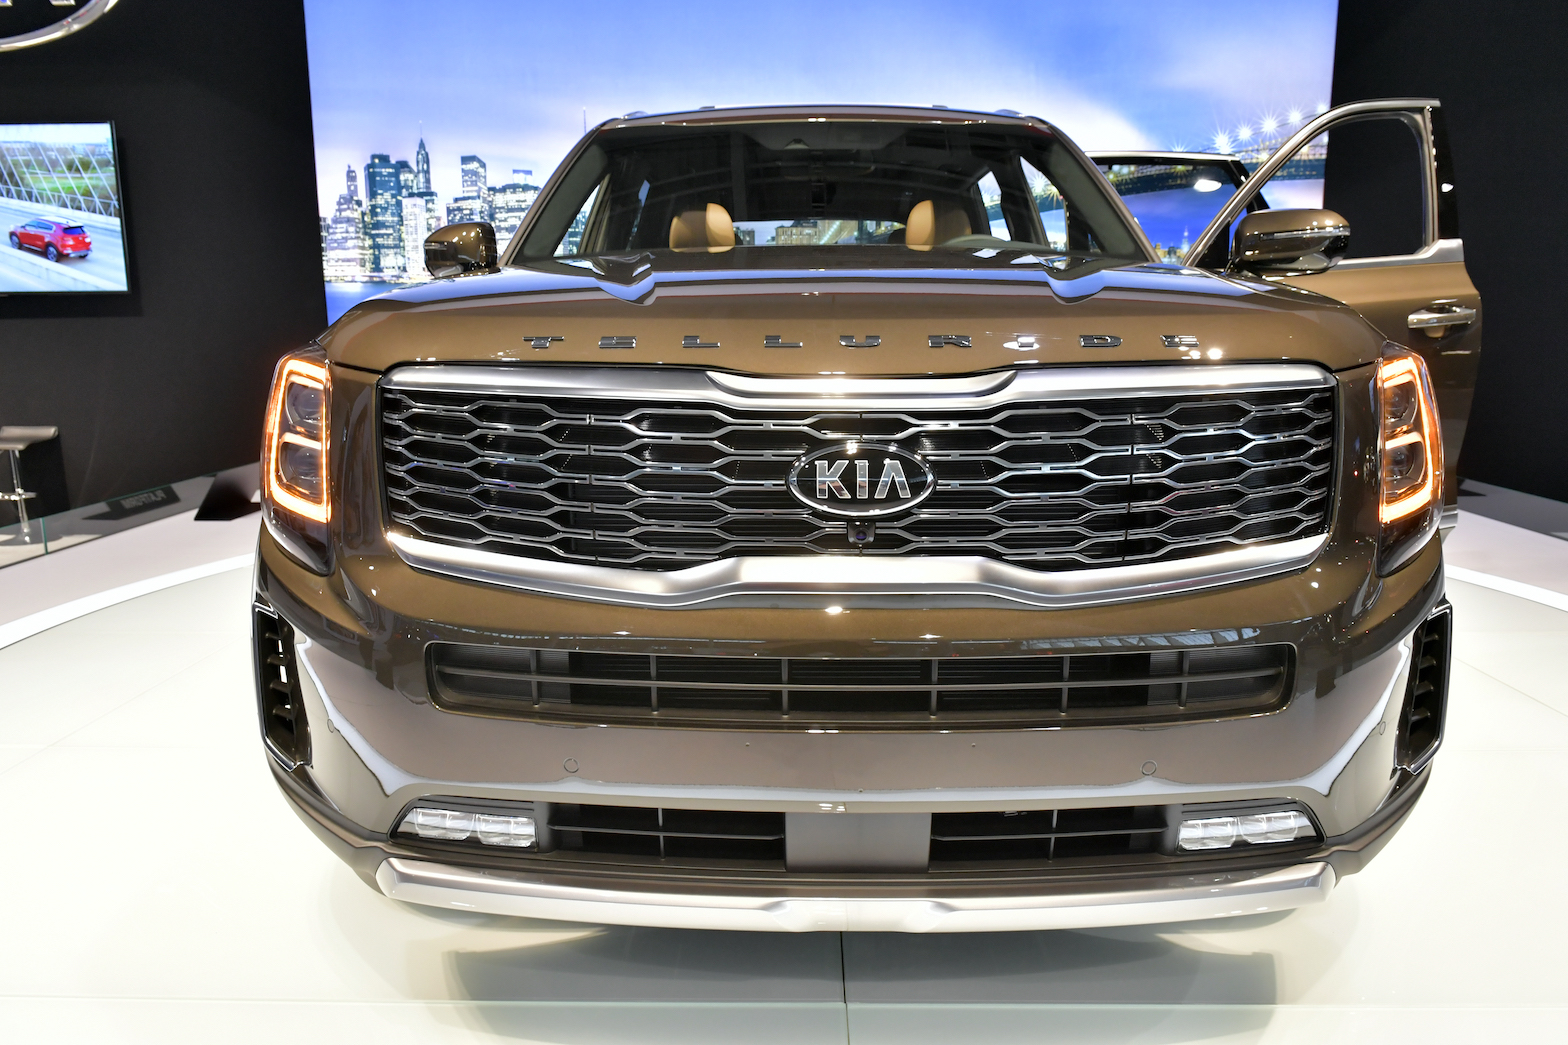 The KIA Telluride is seen at the 2020 New England Auto Show Press Preview at Boston Convention & Exhibition Center